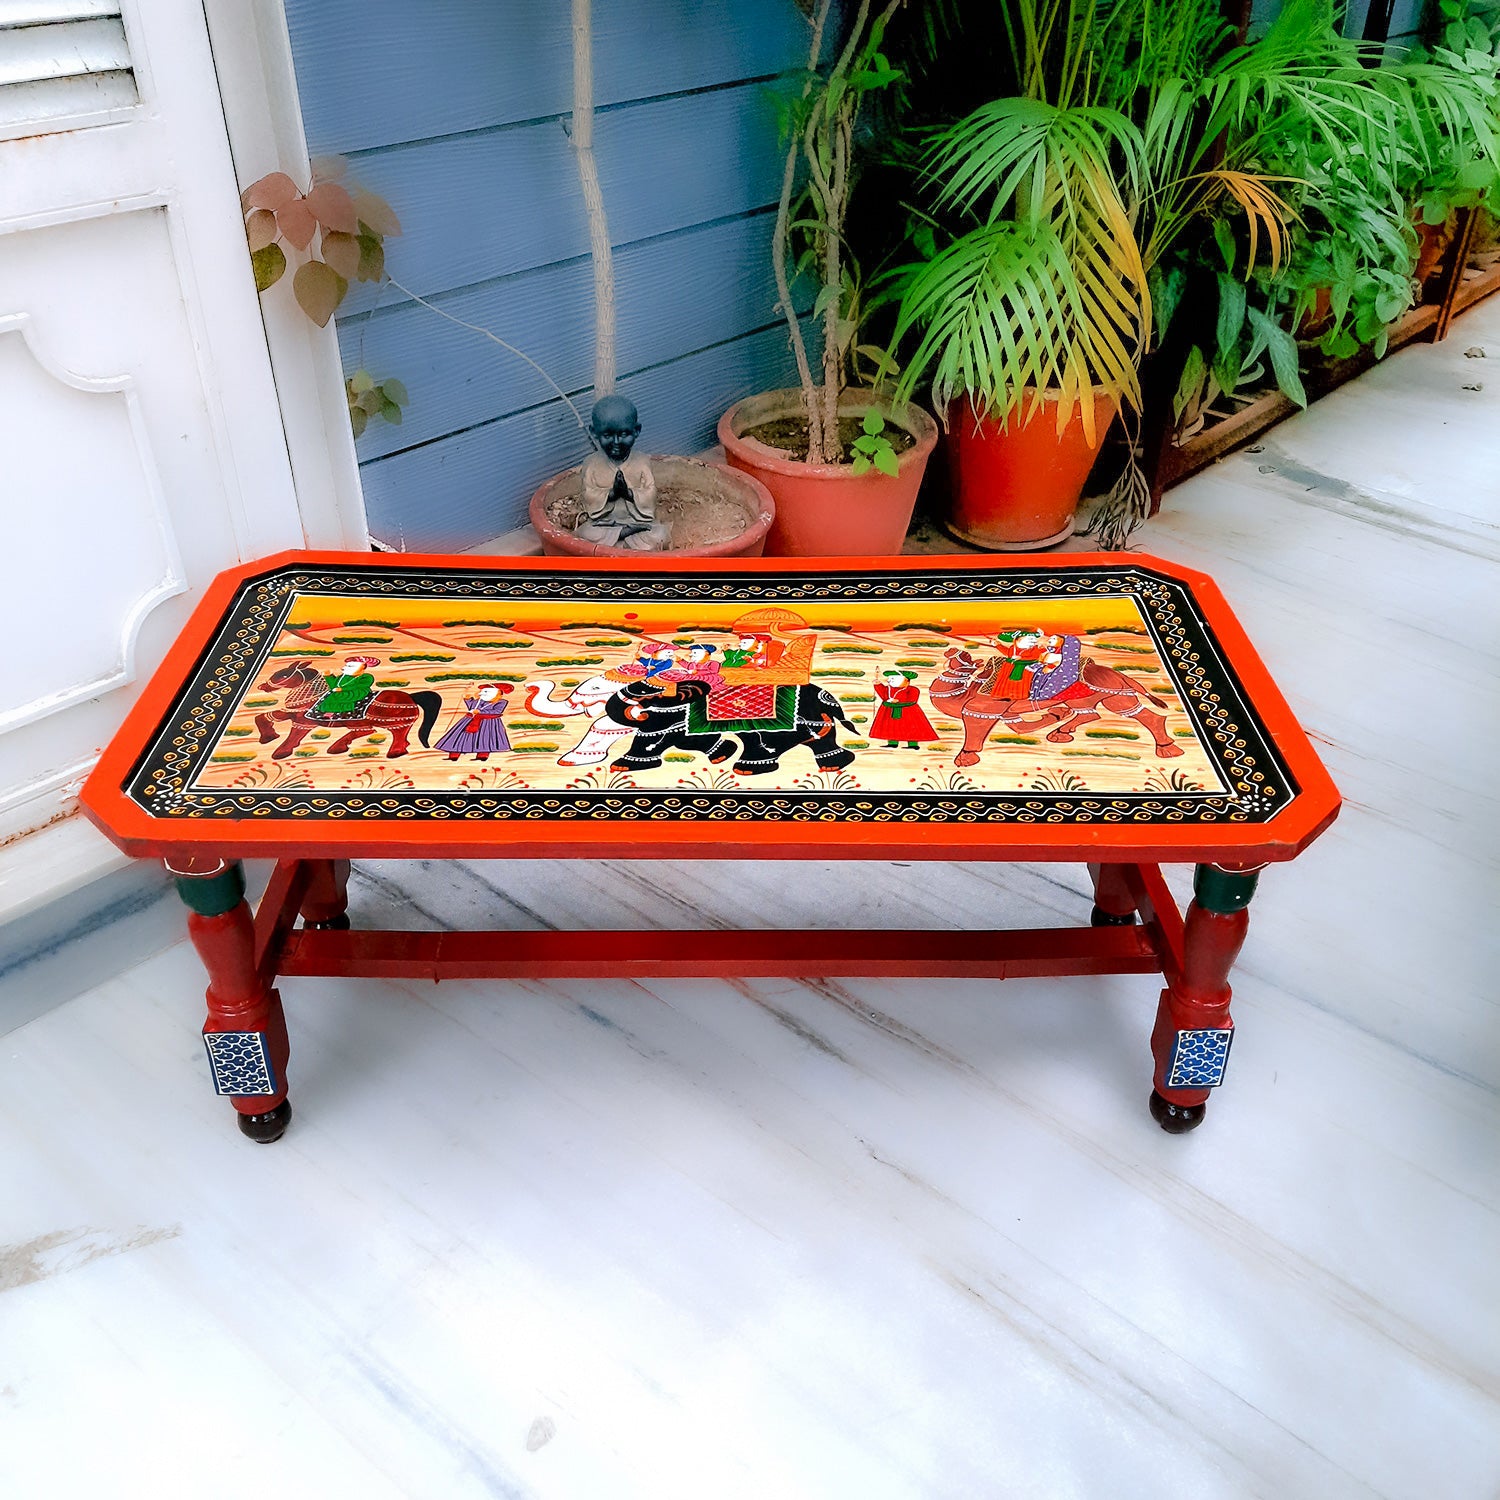 Coffee Tables for Living Room |Table for Home Decor & Gifts - 36 Inch- Apkamart #Color_Orange